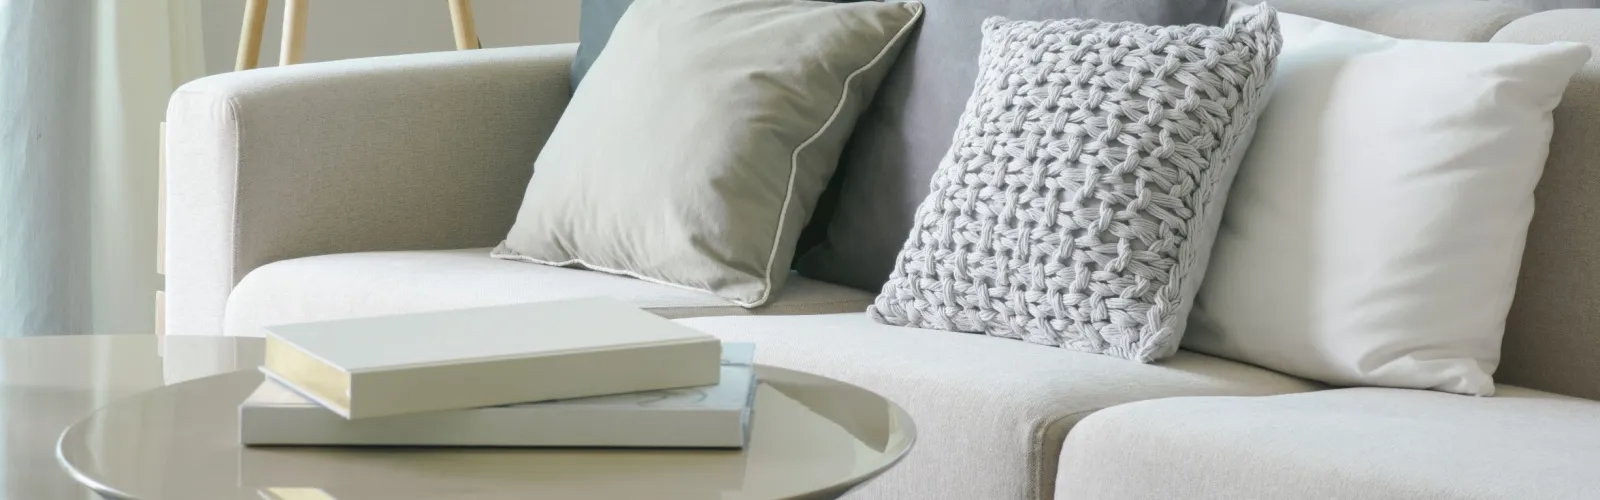 a white couch with pillows